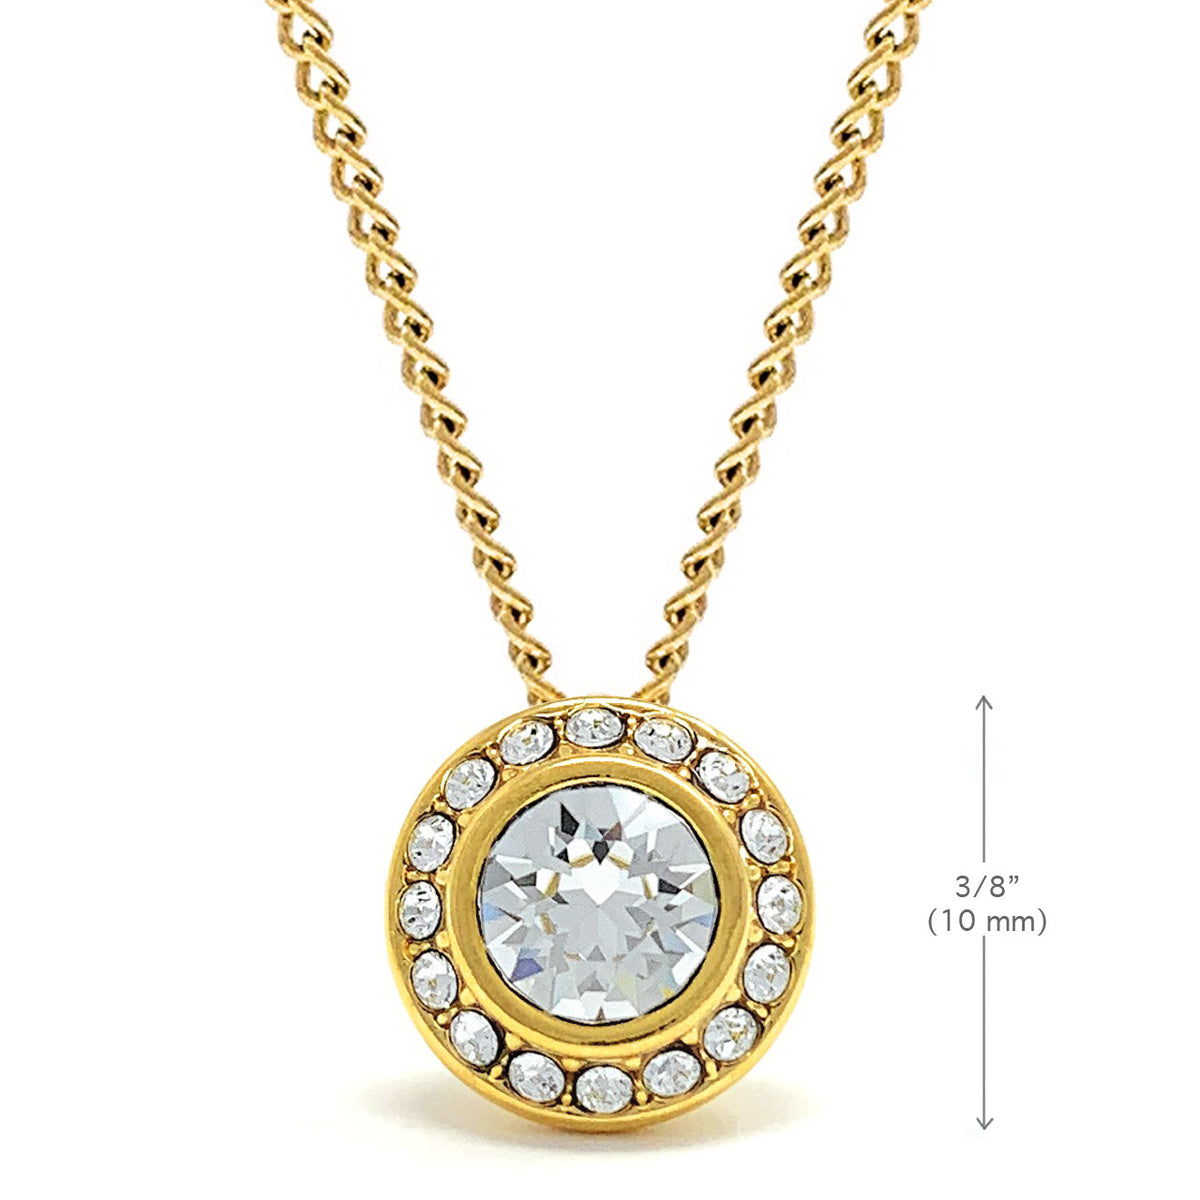 Halo Pave Pendant Necklace with White Clear Round Crystals from Swarovski Gold Plated - Ed Heart